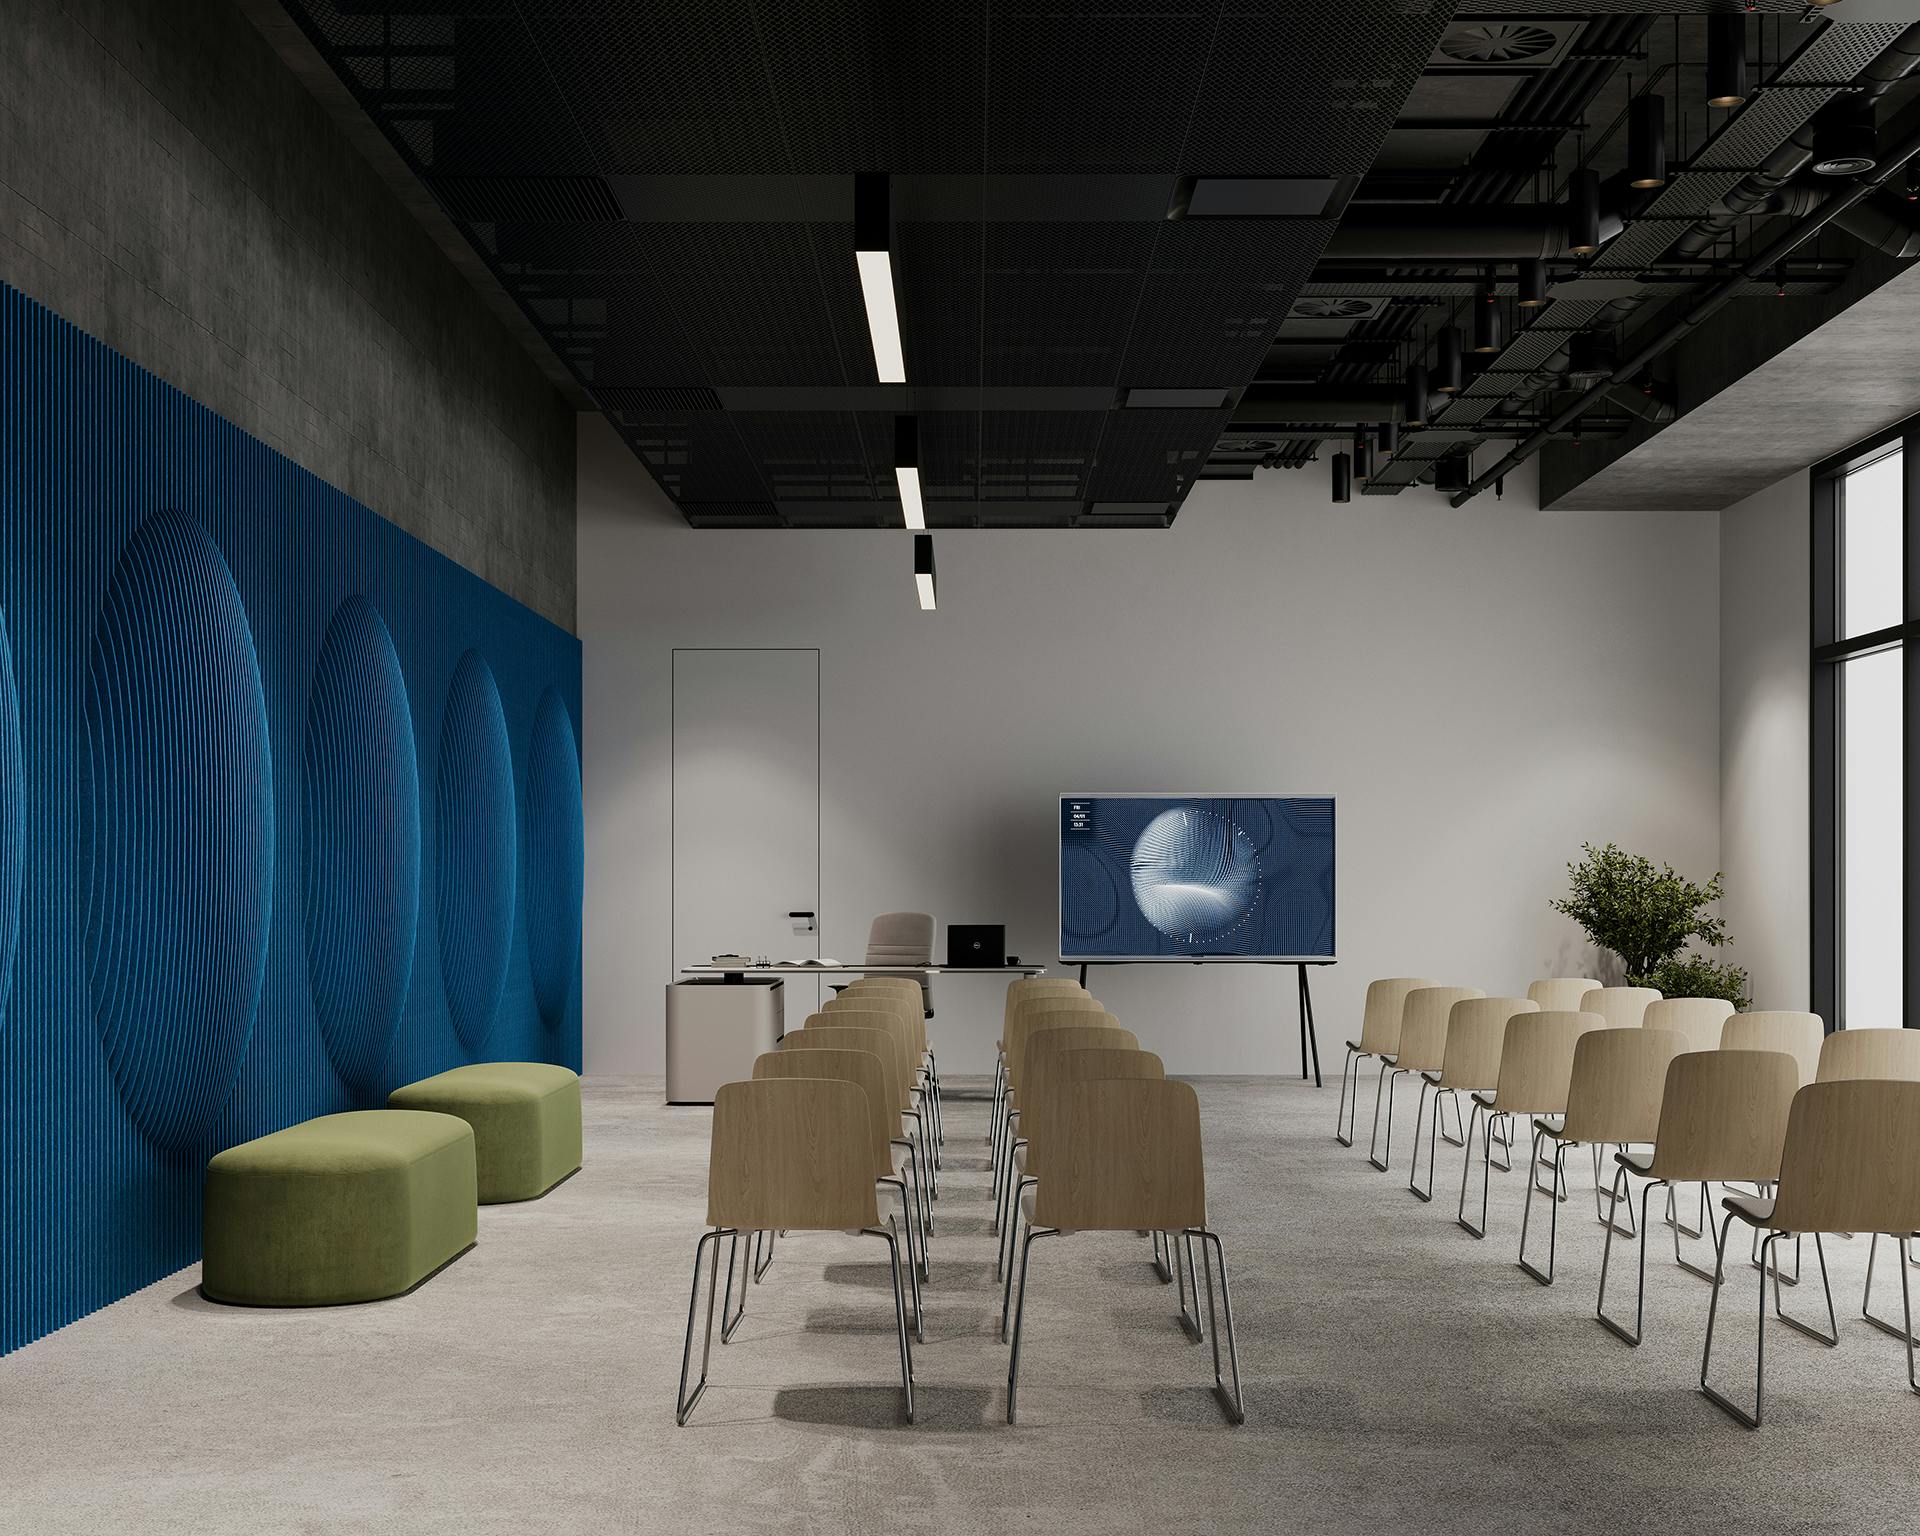 A modern conference room features rows of wooden chairs facing a screen displaying a presentation. The room has a minimalist design with a blue textured wall, green ottomans, and a desk at the front. Large windows allow natural light to fill the space.